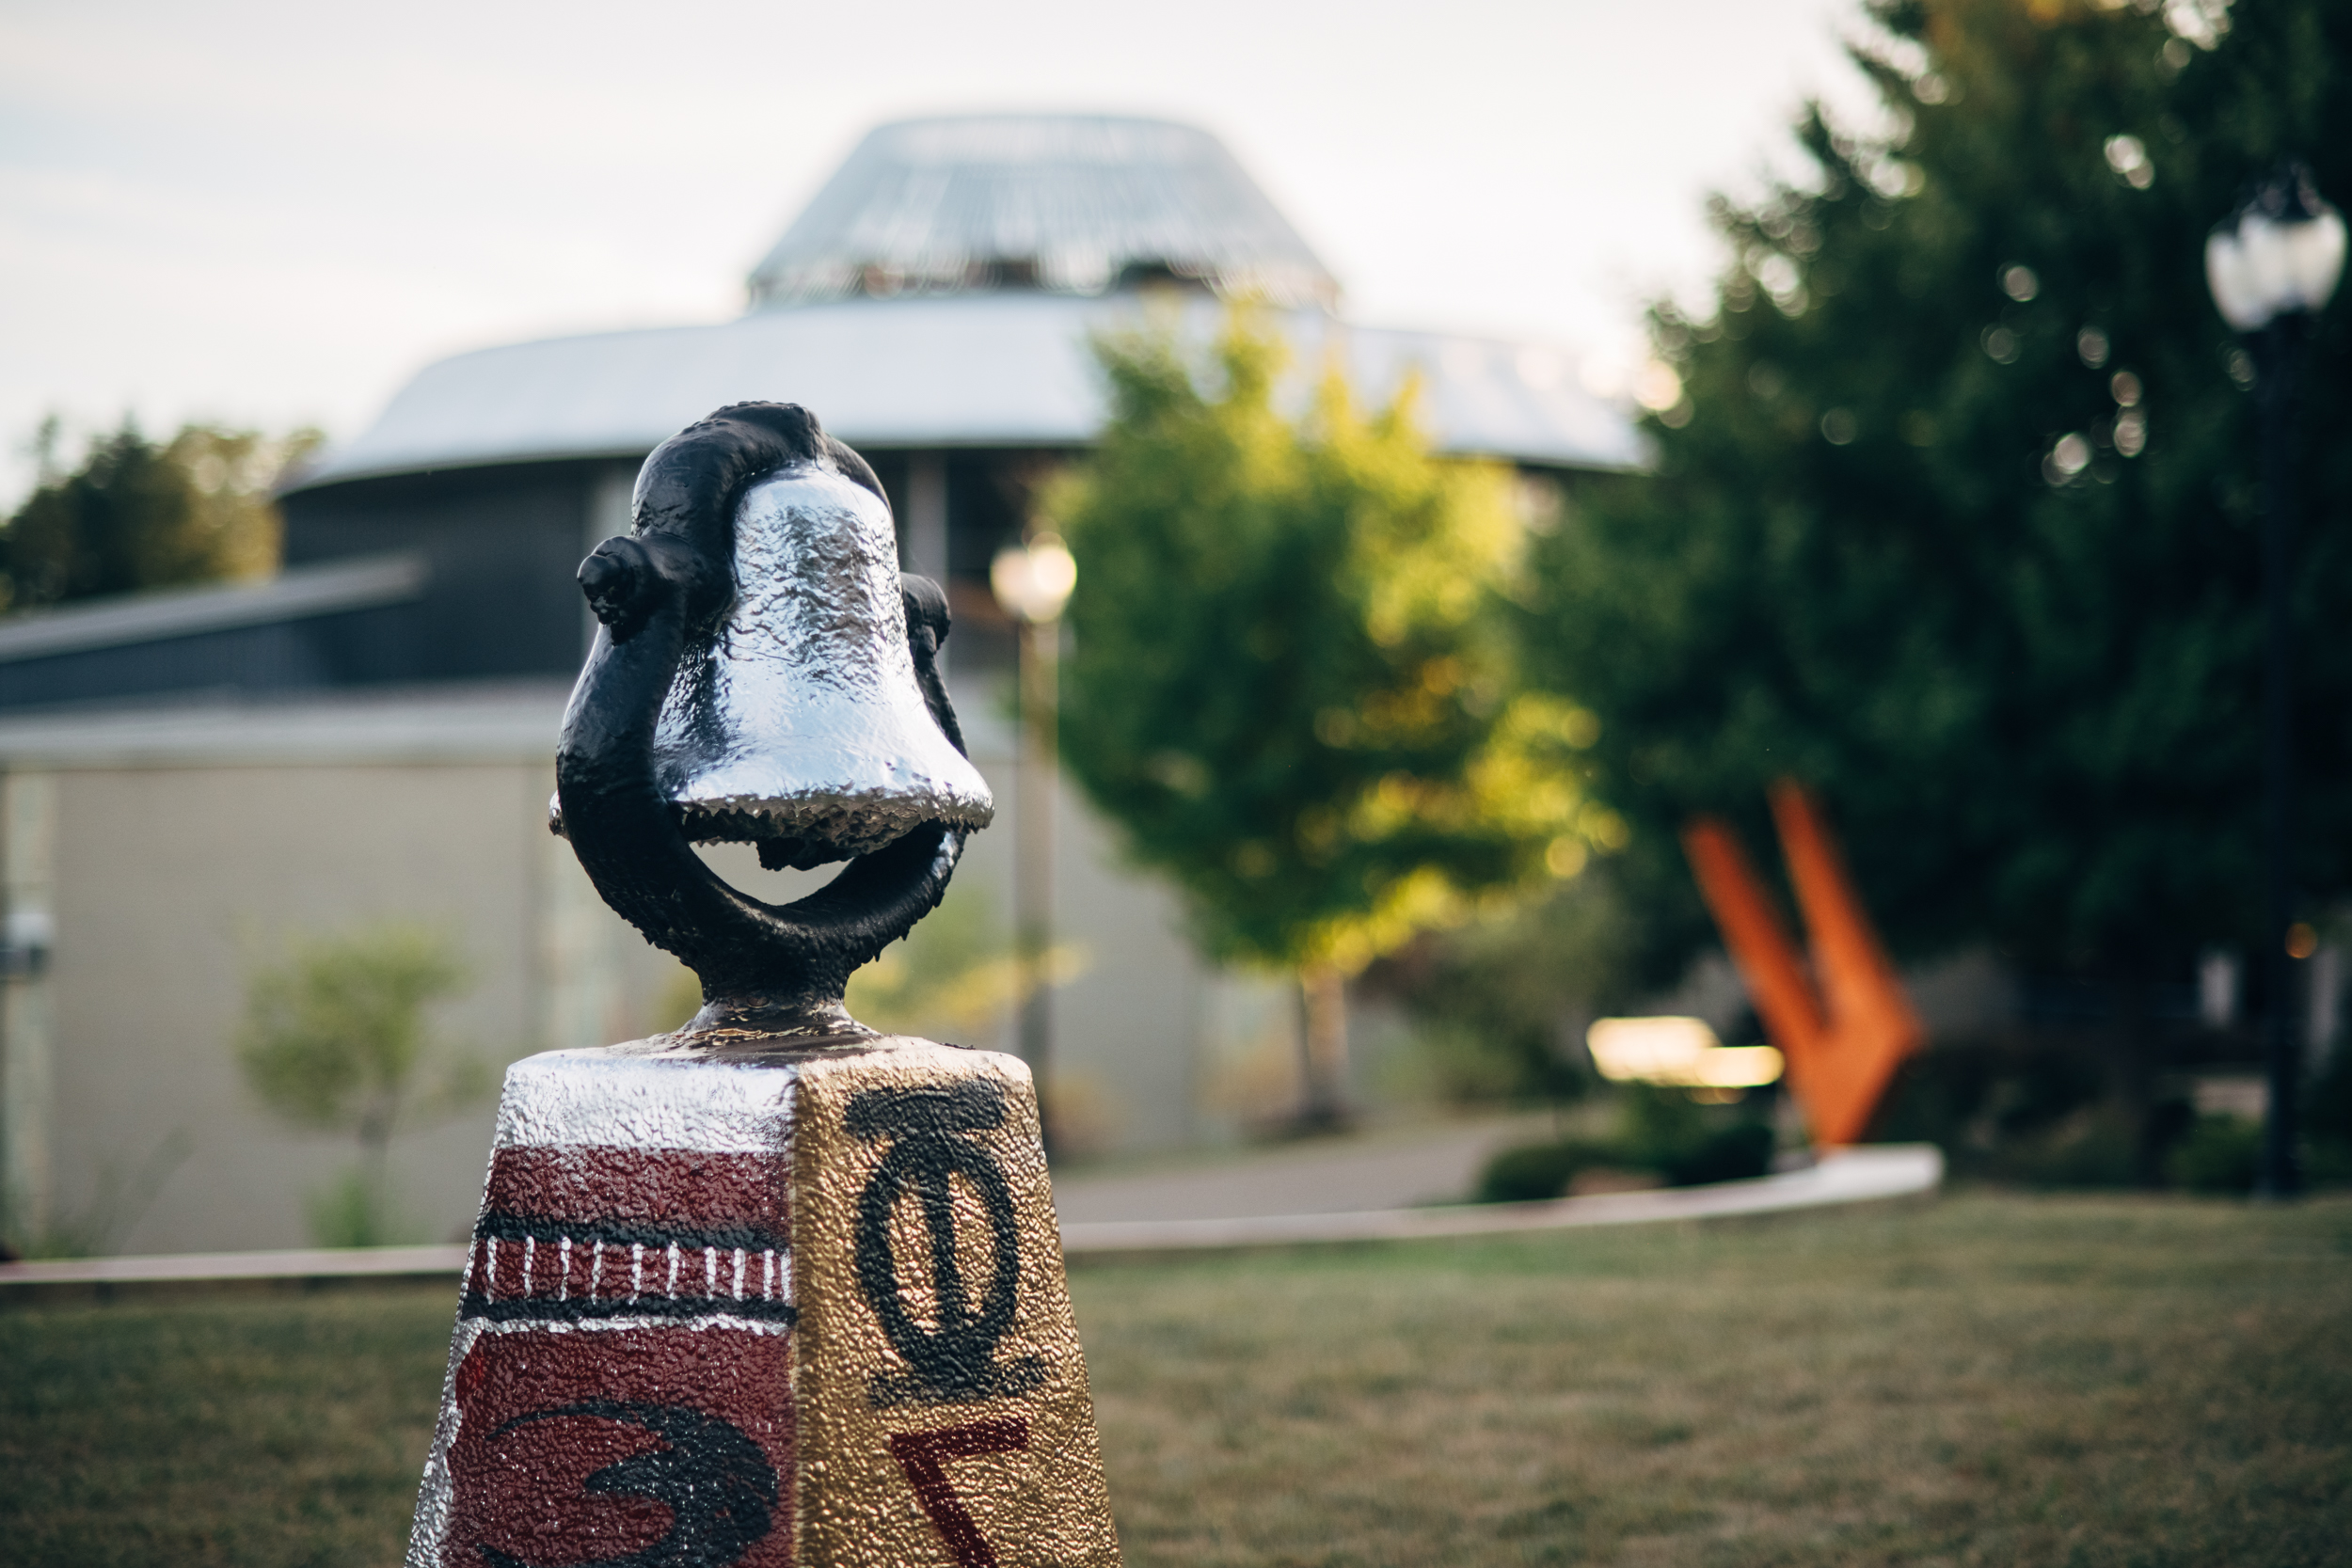 A close-up of the campus victory bell, which is painted silver and black. The base the bell sits on is painted maroon, gold, silver, and black, and features Greek letters. In the background, you can see the soft outlines of a bright orange abstract sculpture.